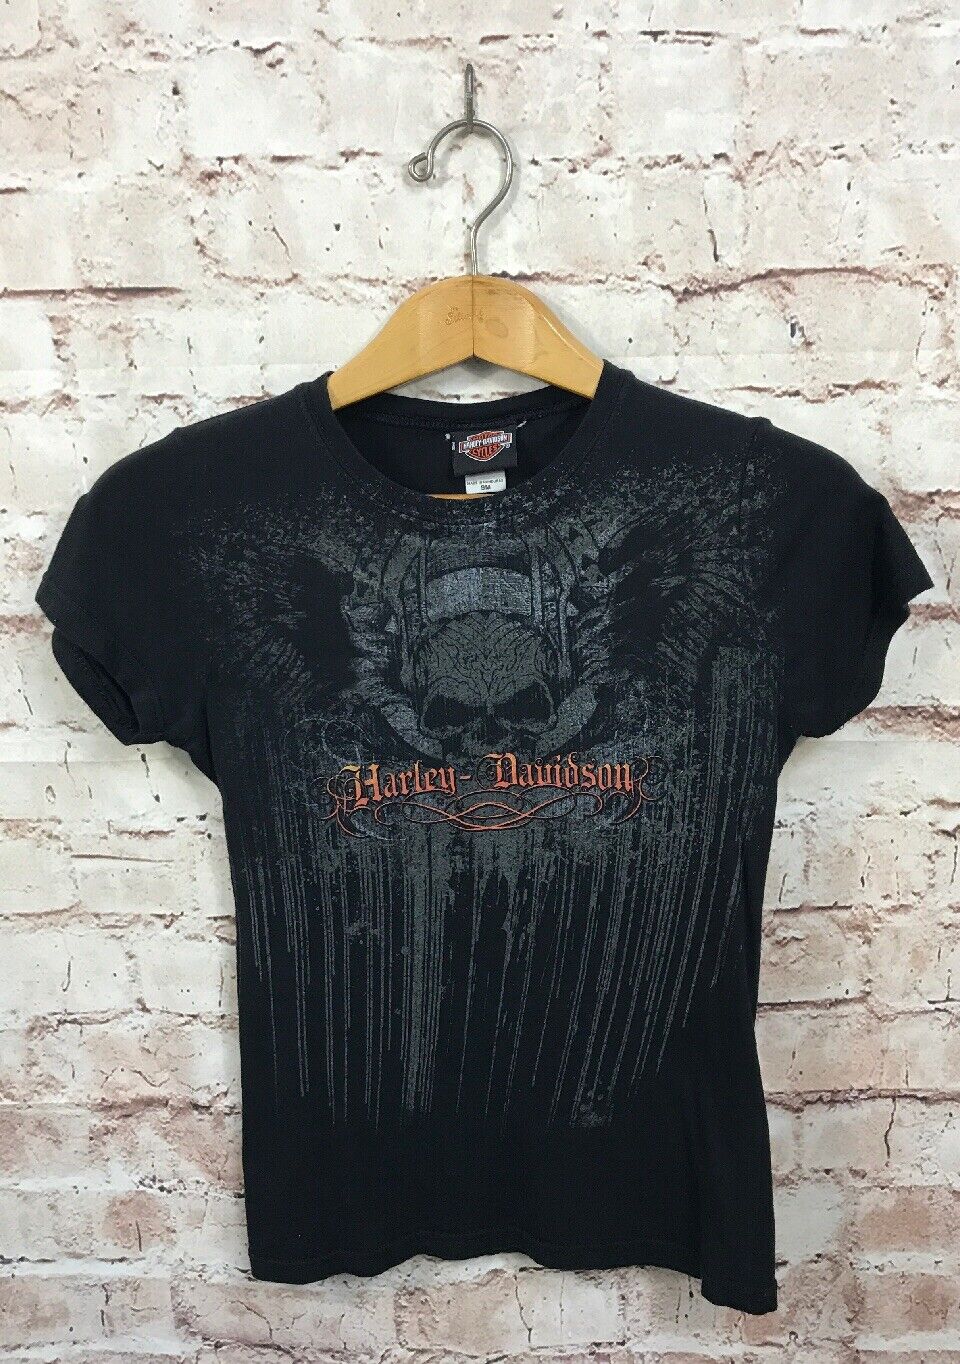 Harley Davidson Shirt Size Small Women’s Fitted Short Sleeve Jackson Tennessee